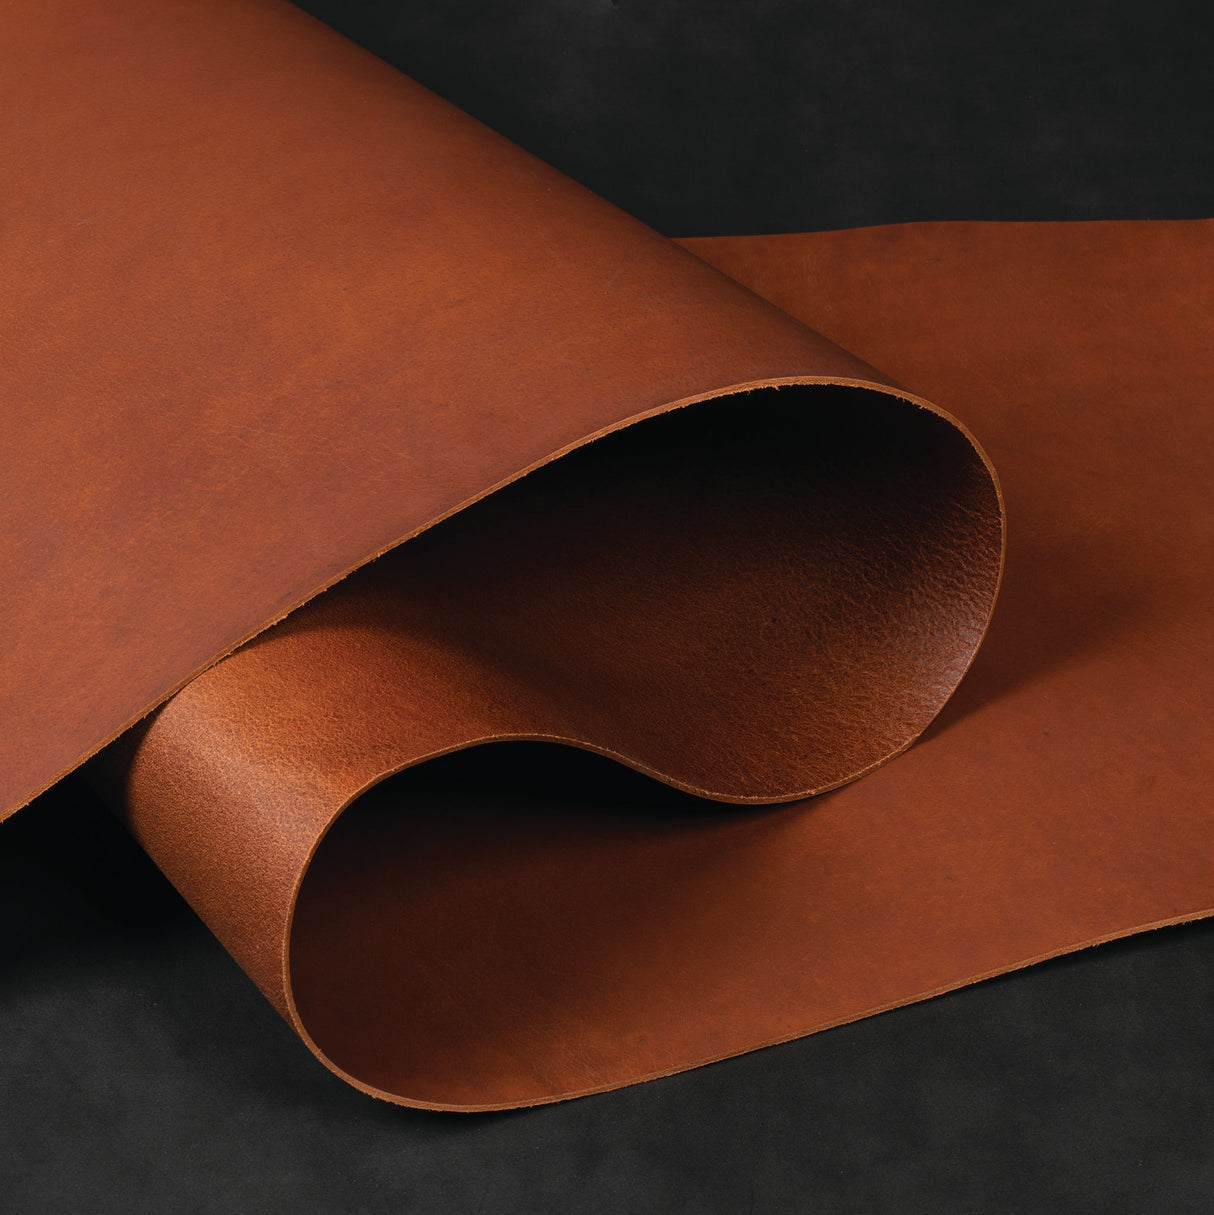 Weaver Leather Supply Upholstery Leather, Whole Hide, 2/3 oz.